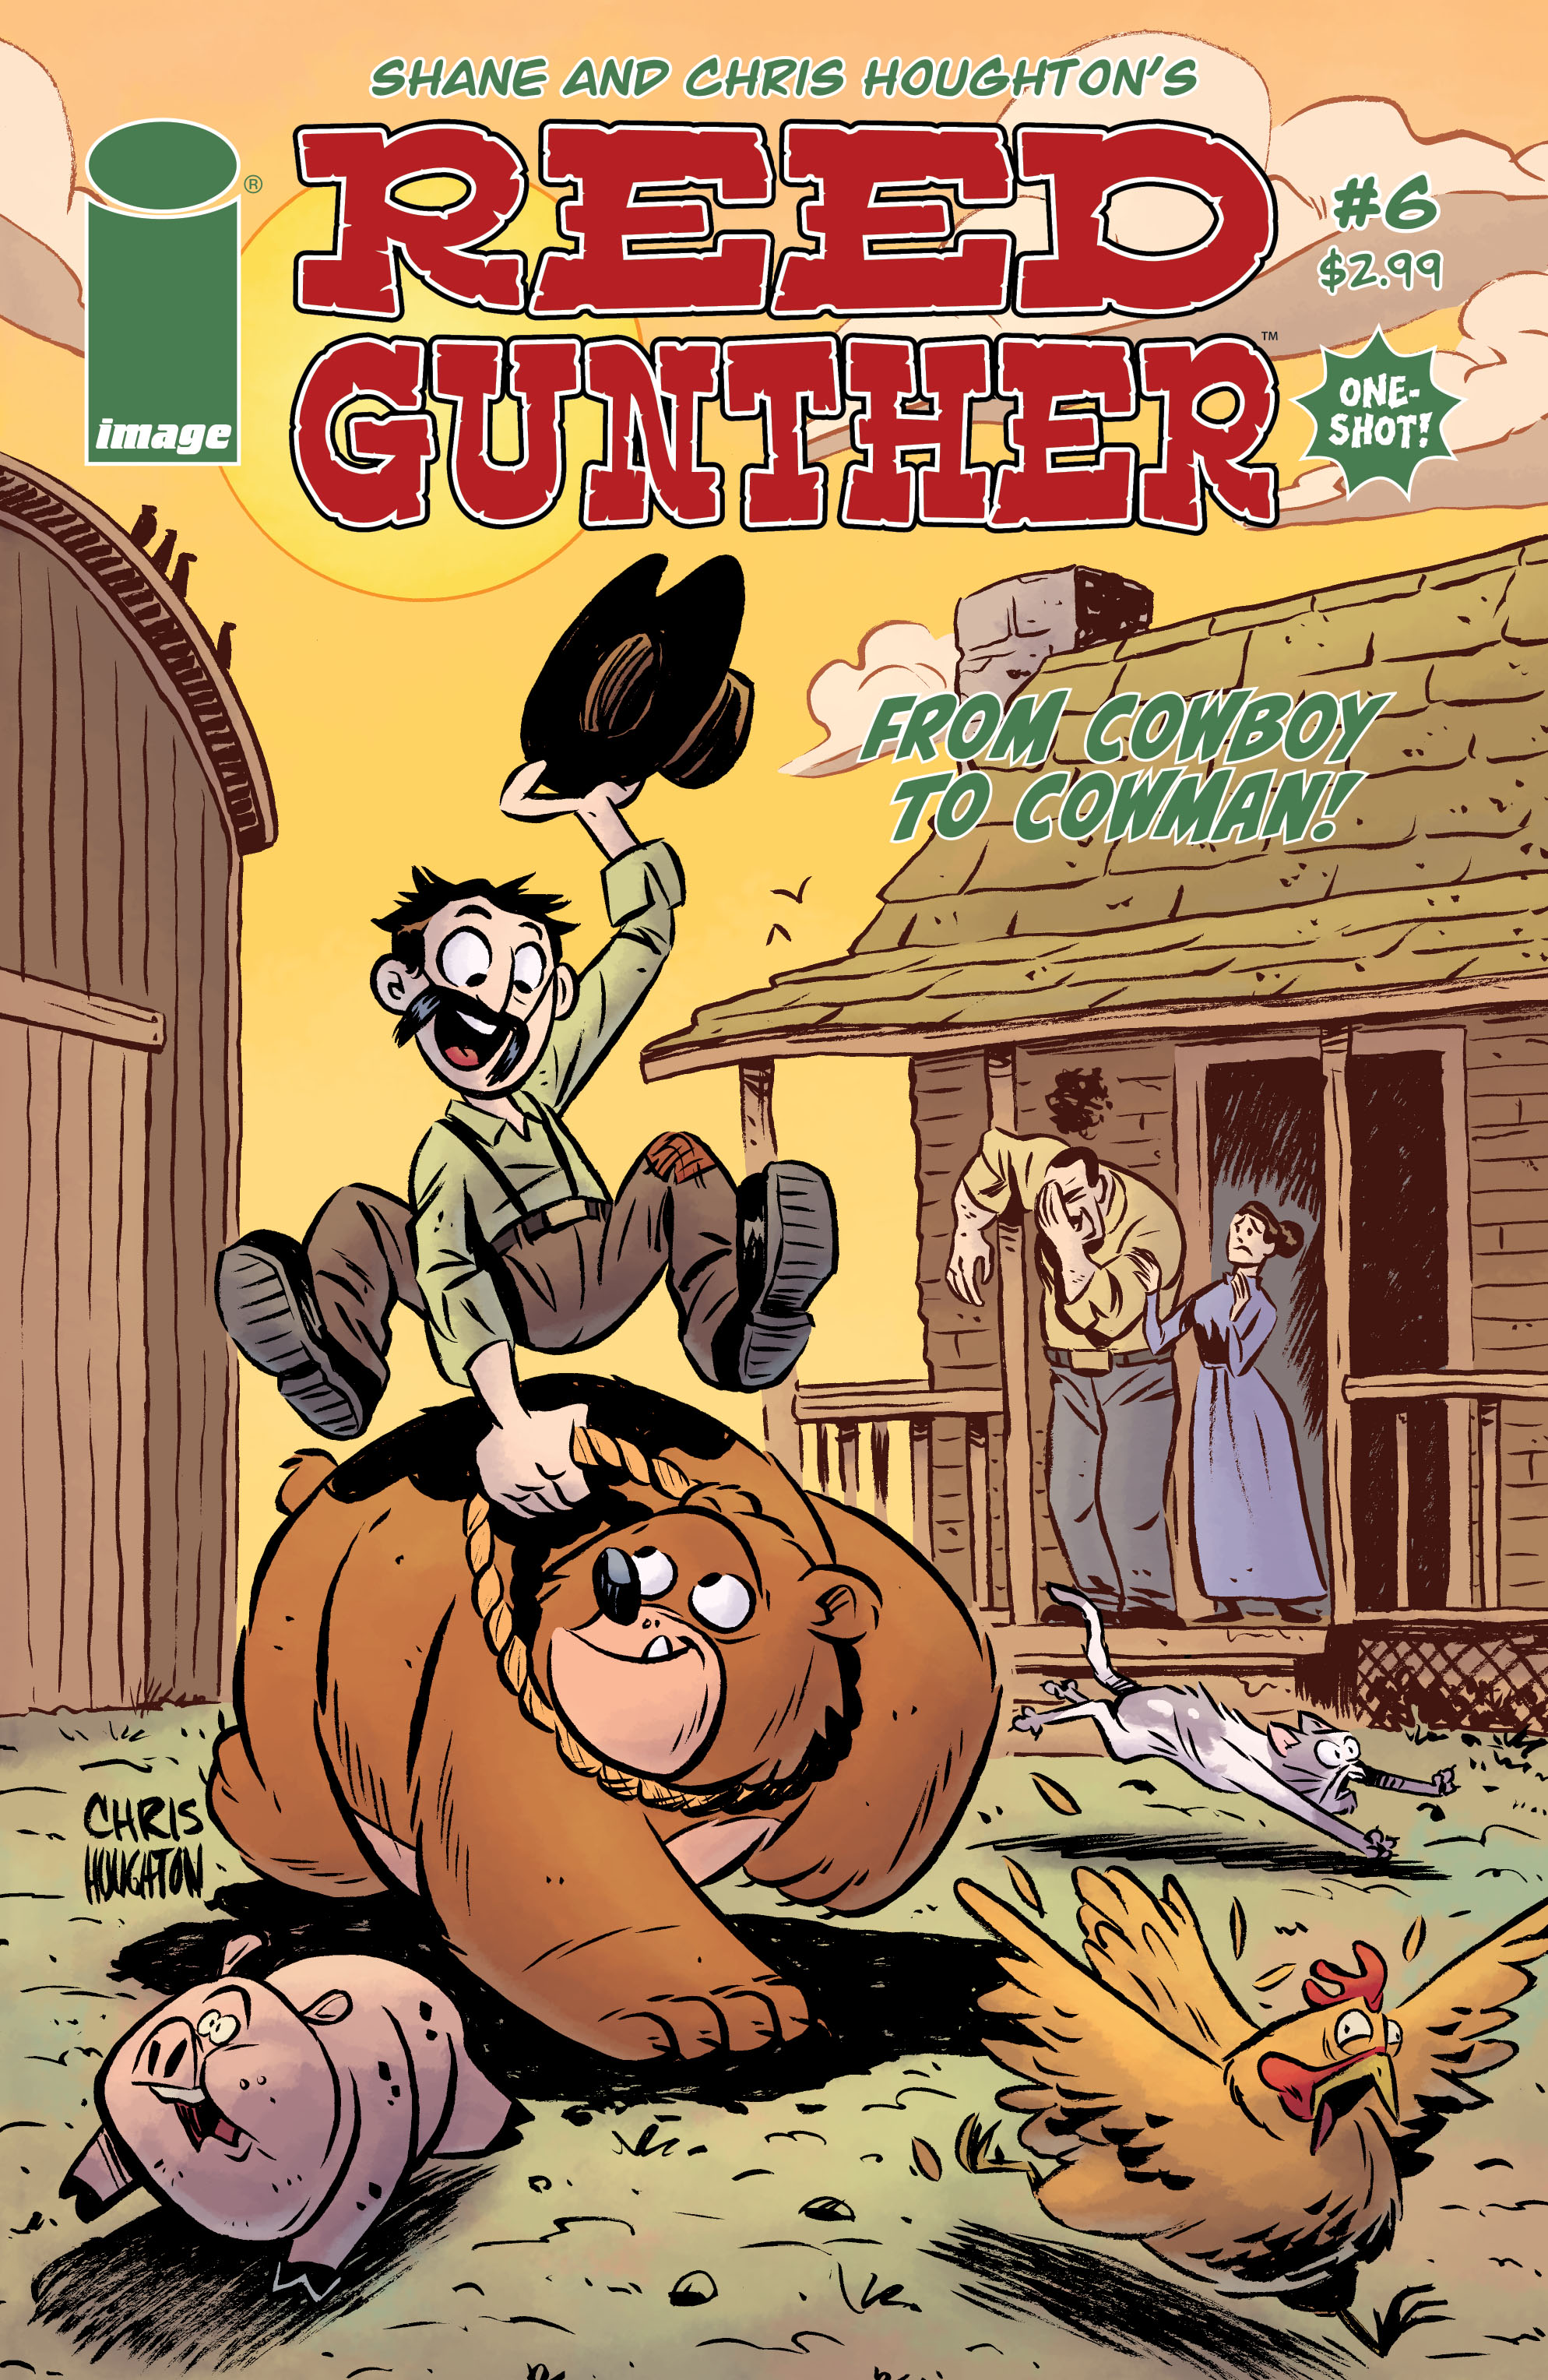 Read online Reed Gunther comic -  Issue #6 - 1